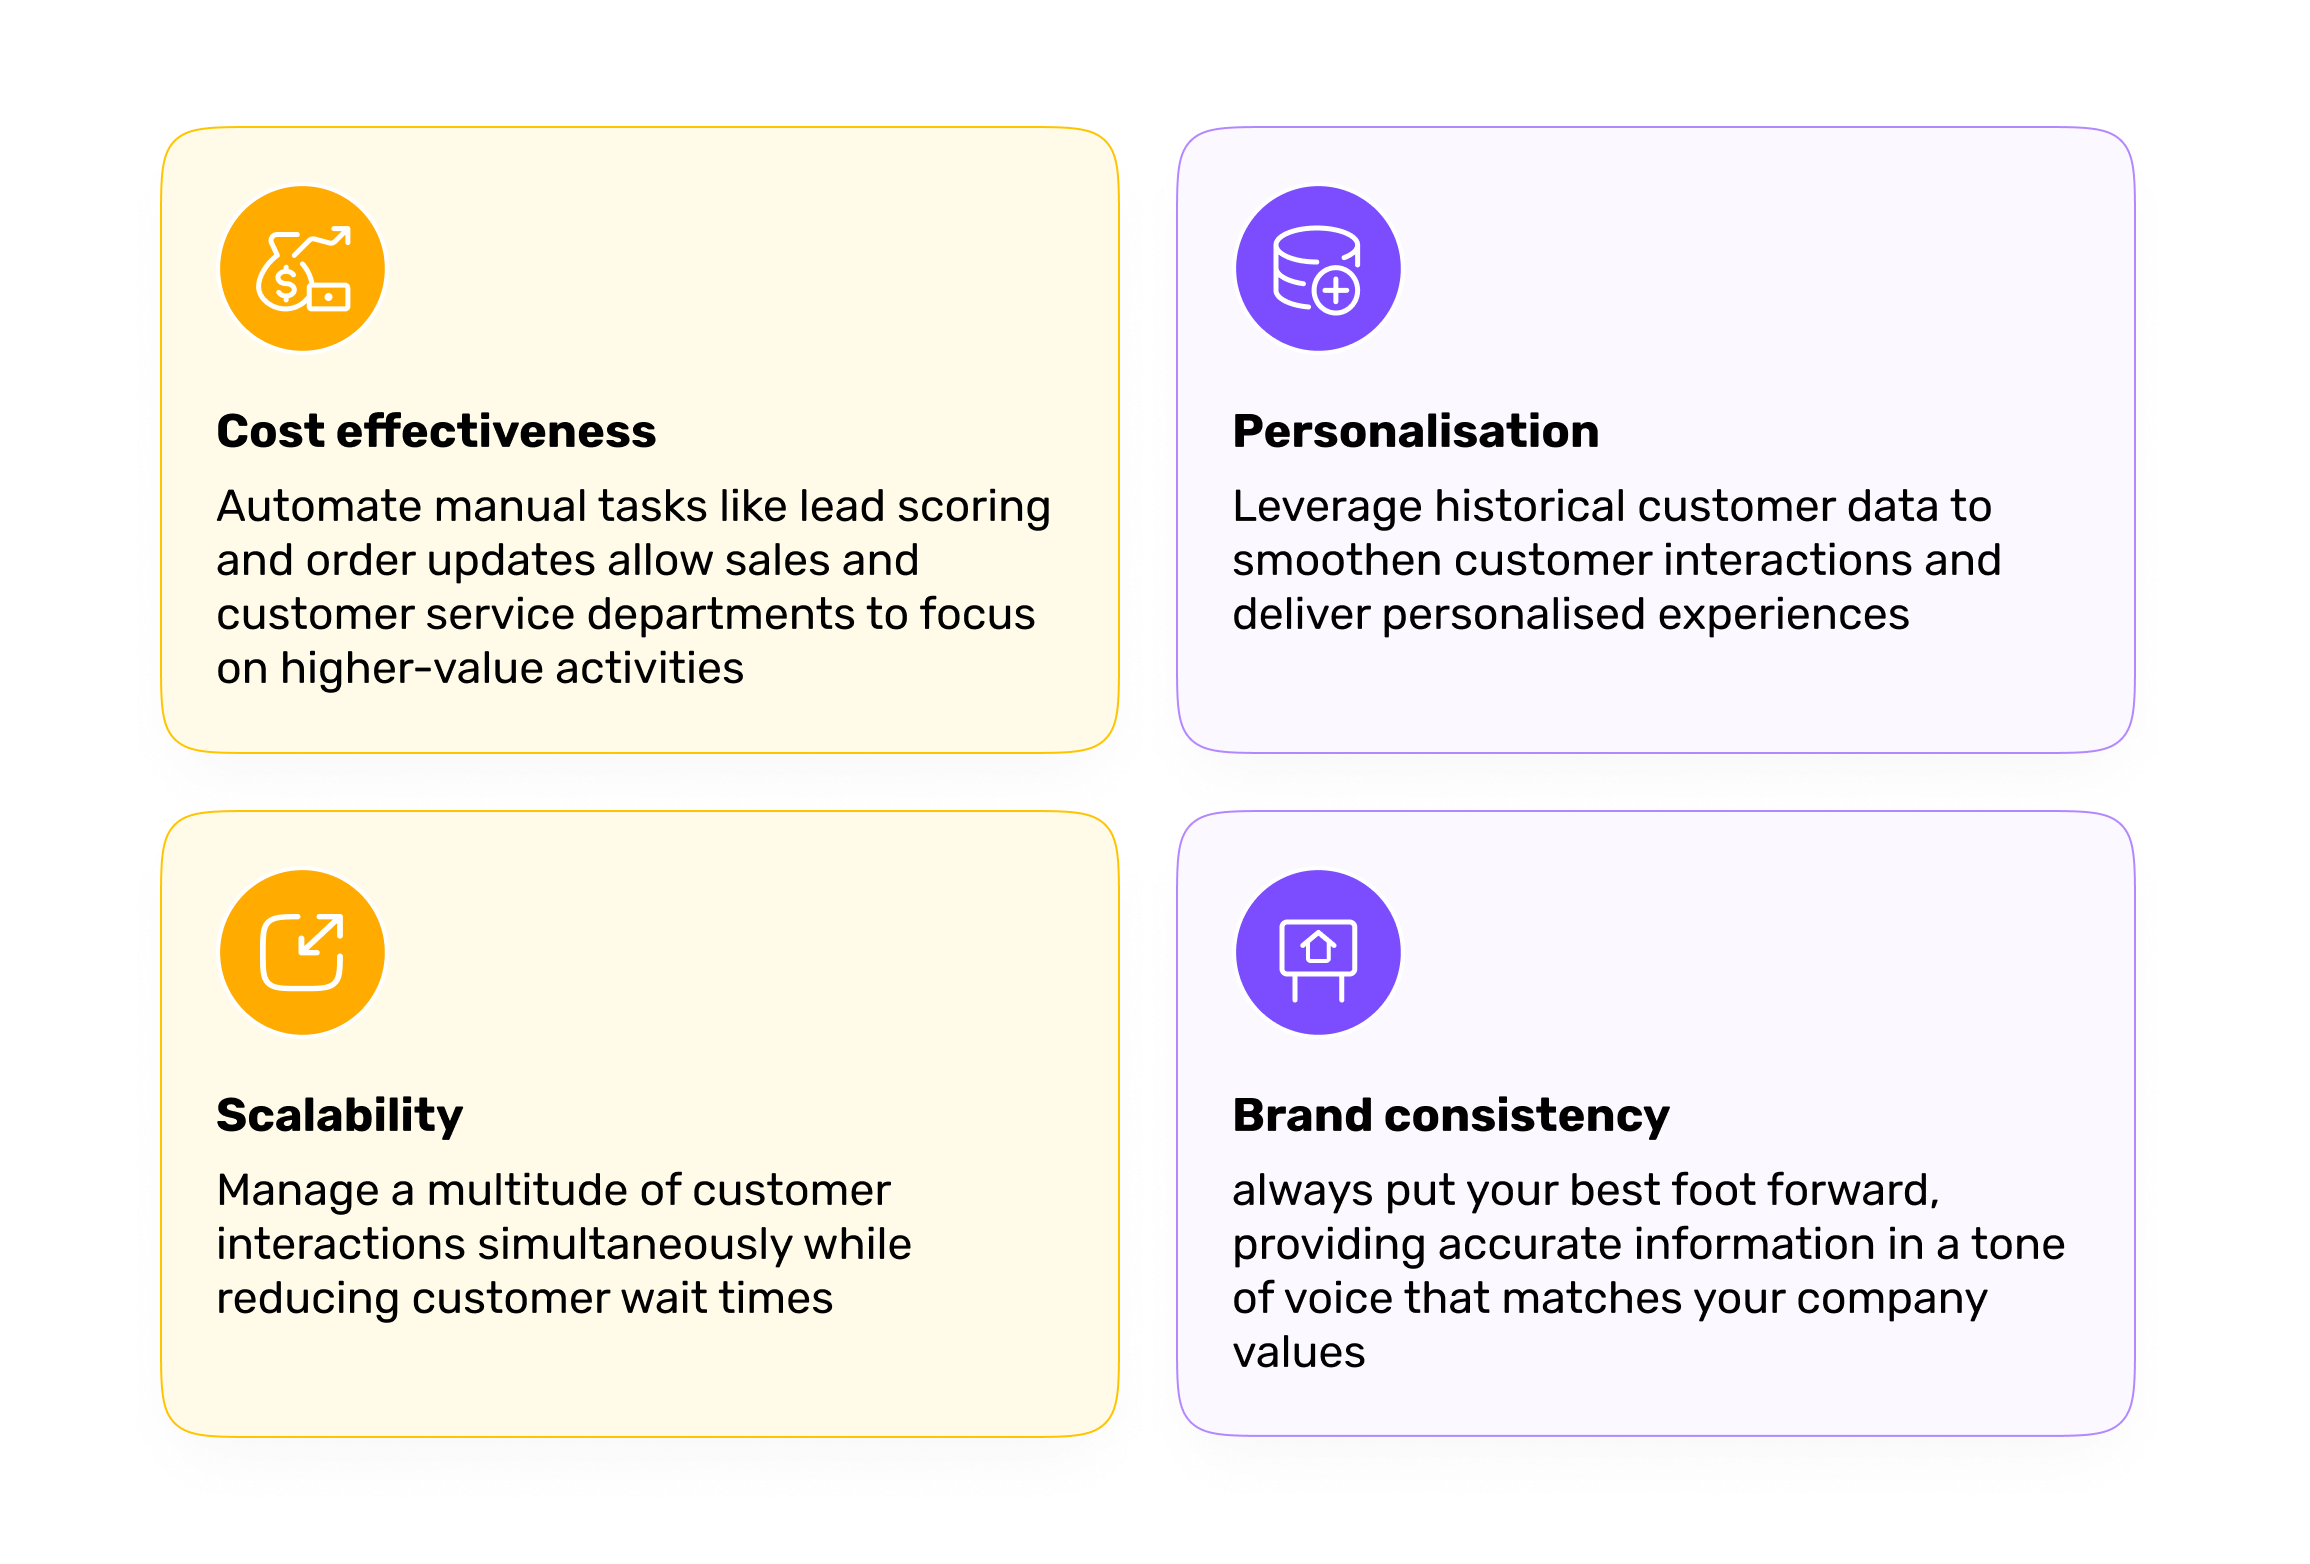 Top 4 conversational AI benefits - Cost effectiveness, personalisation, scalability and brand consistency